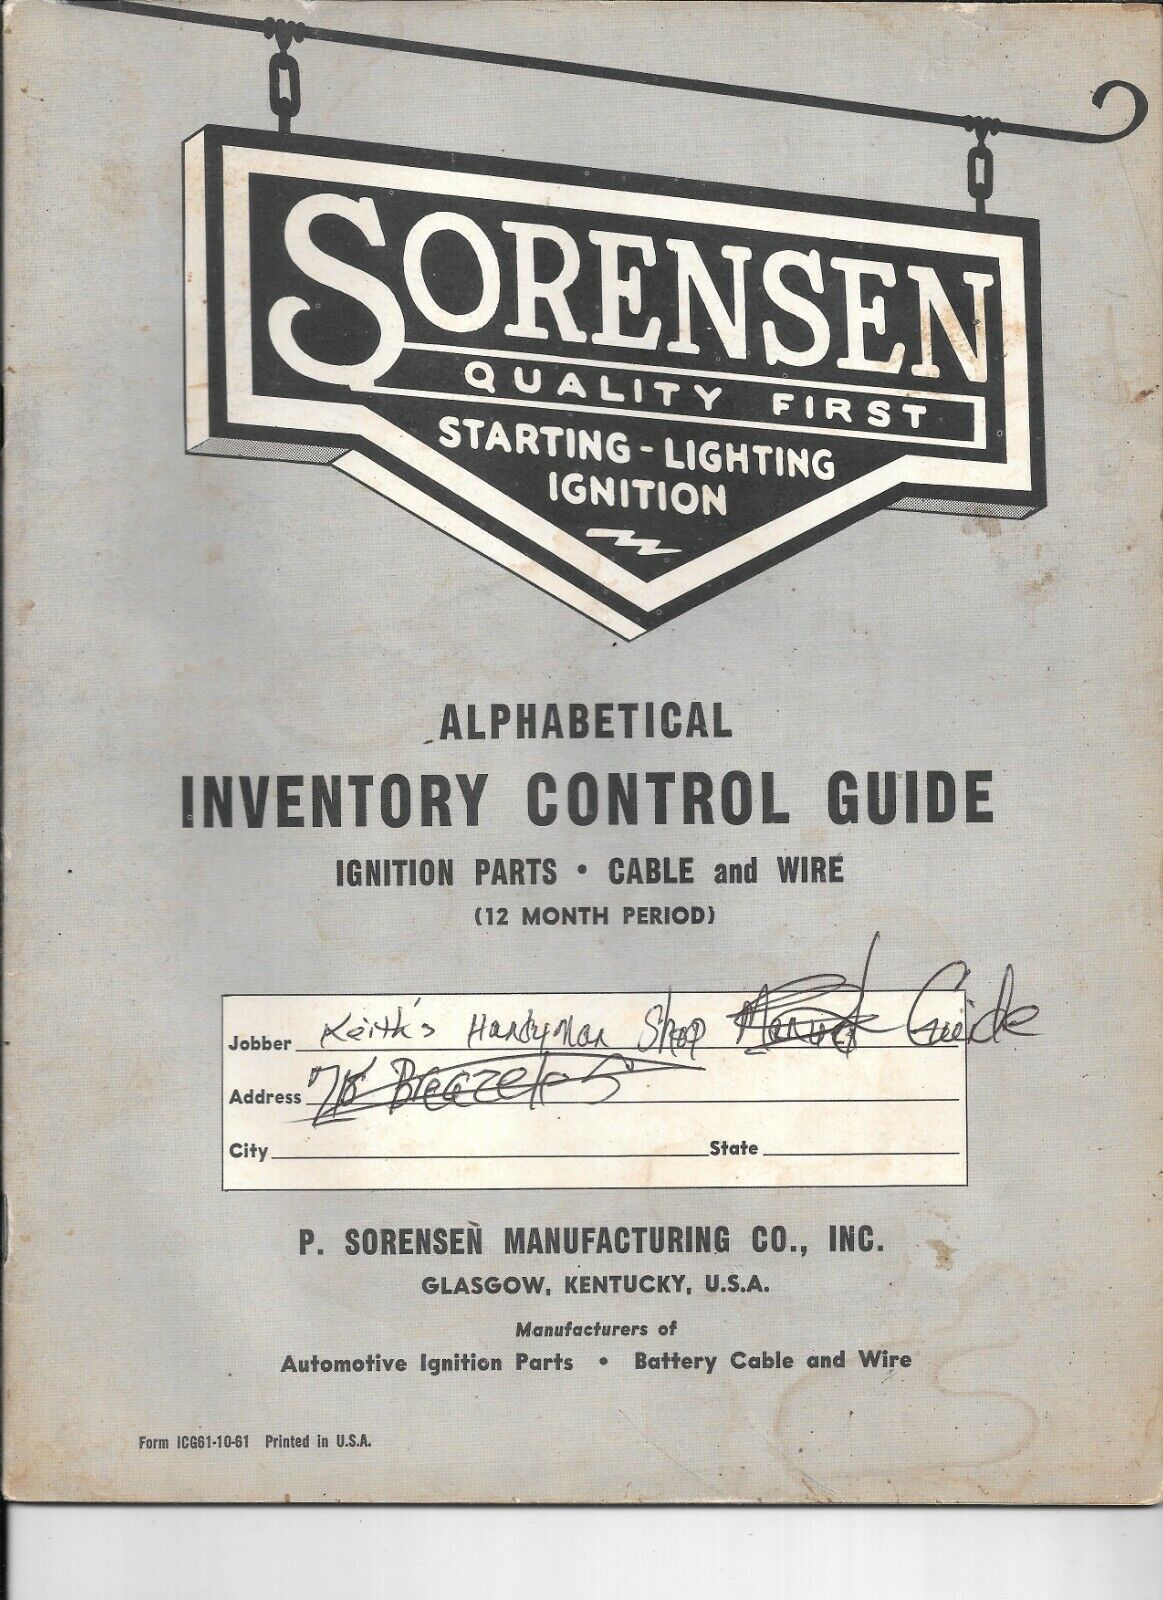 1961 SORENSEN Inventory Control Guide, Ignition Parts, Cable and Wire, Unused